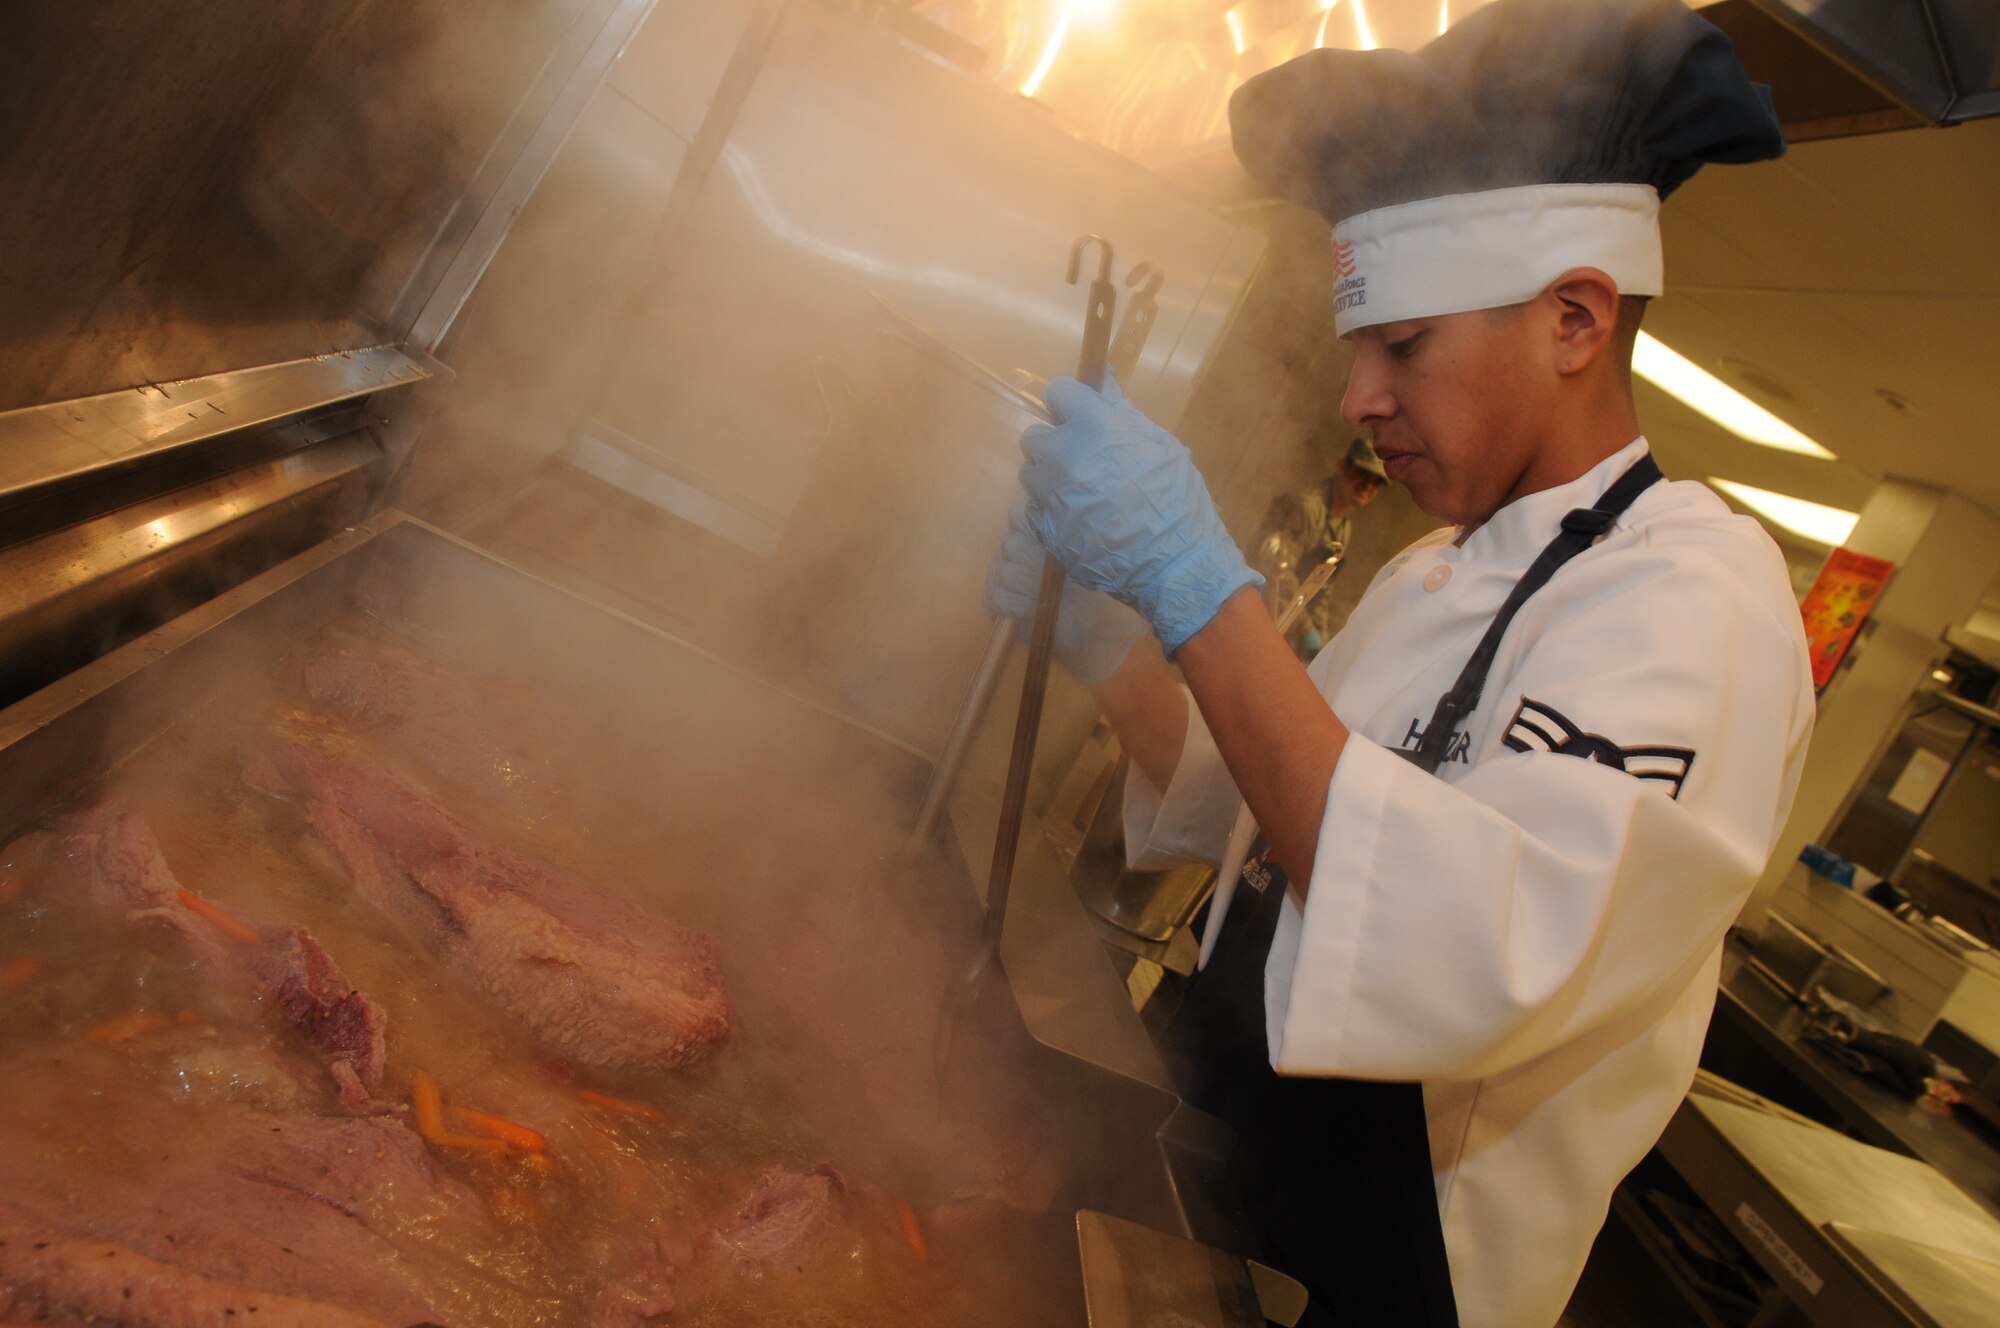 Airman 1st Class Damian Huizar with the 185th services fight prepares corned beef brisket for the afternoon meal at the 185th Air Refueling Wing (ARW) kitchen on March 01, 2014. The 185th ARW services flight is one of three units in the nation competing for the best kitchen Disney Award.
U.S. Air National Guard Photo by: Tech Sgt. Oscar Sanchez/Released
